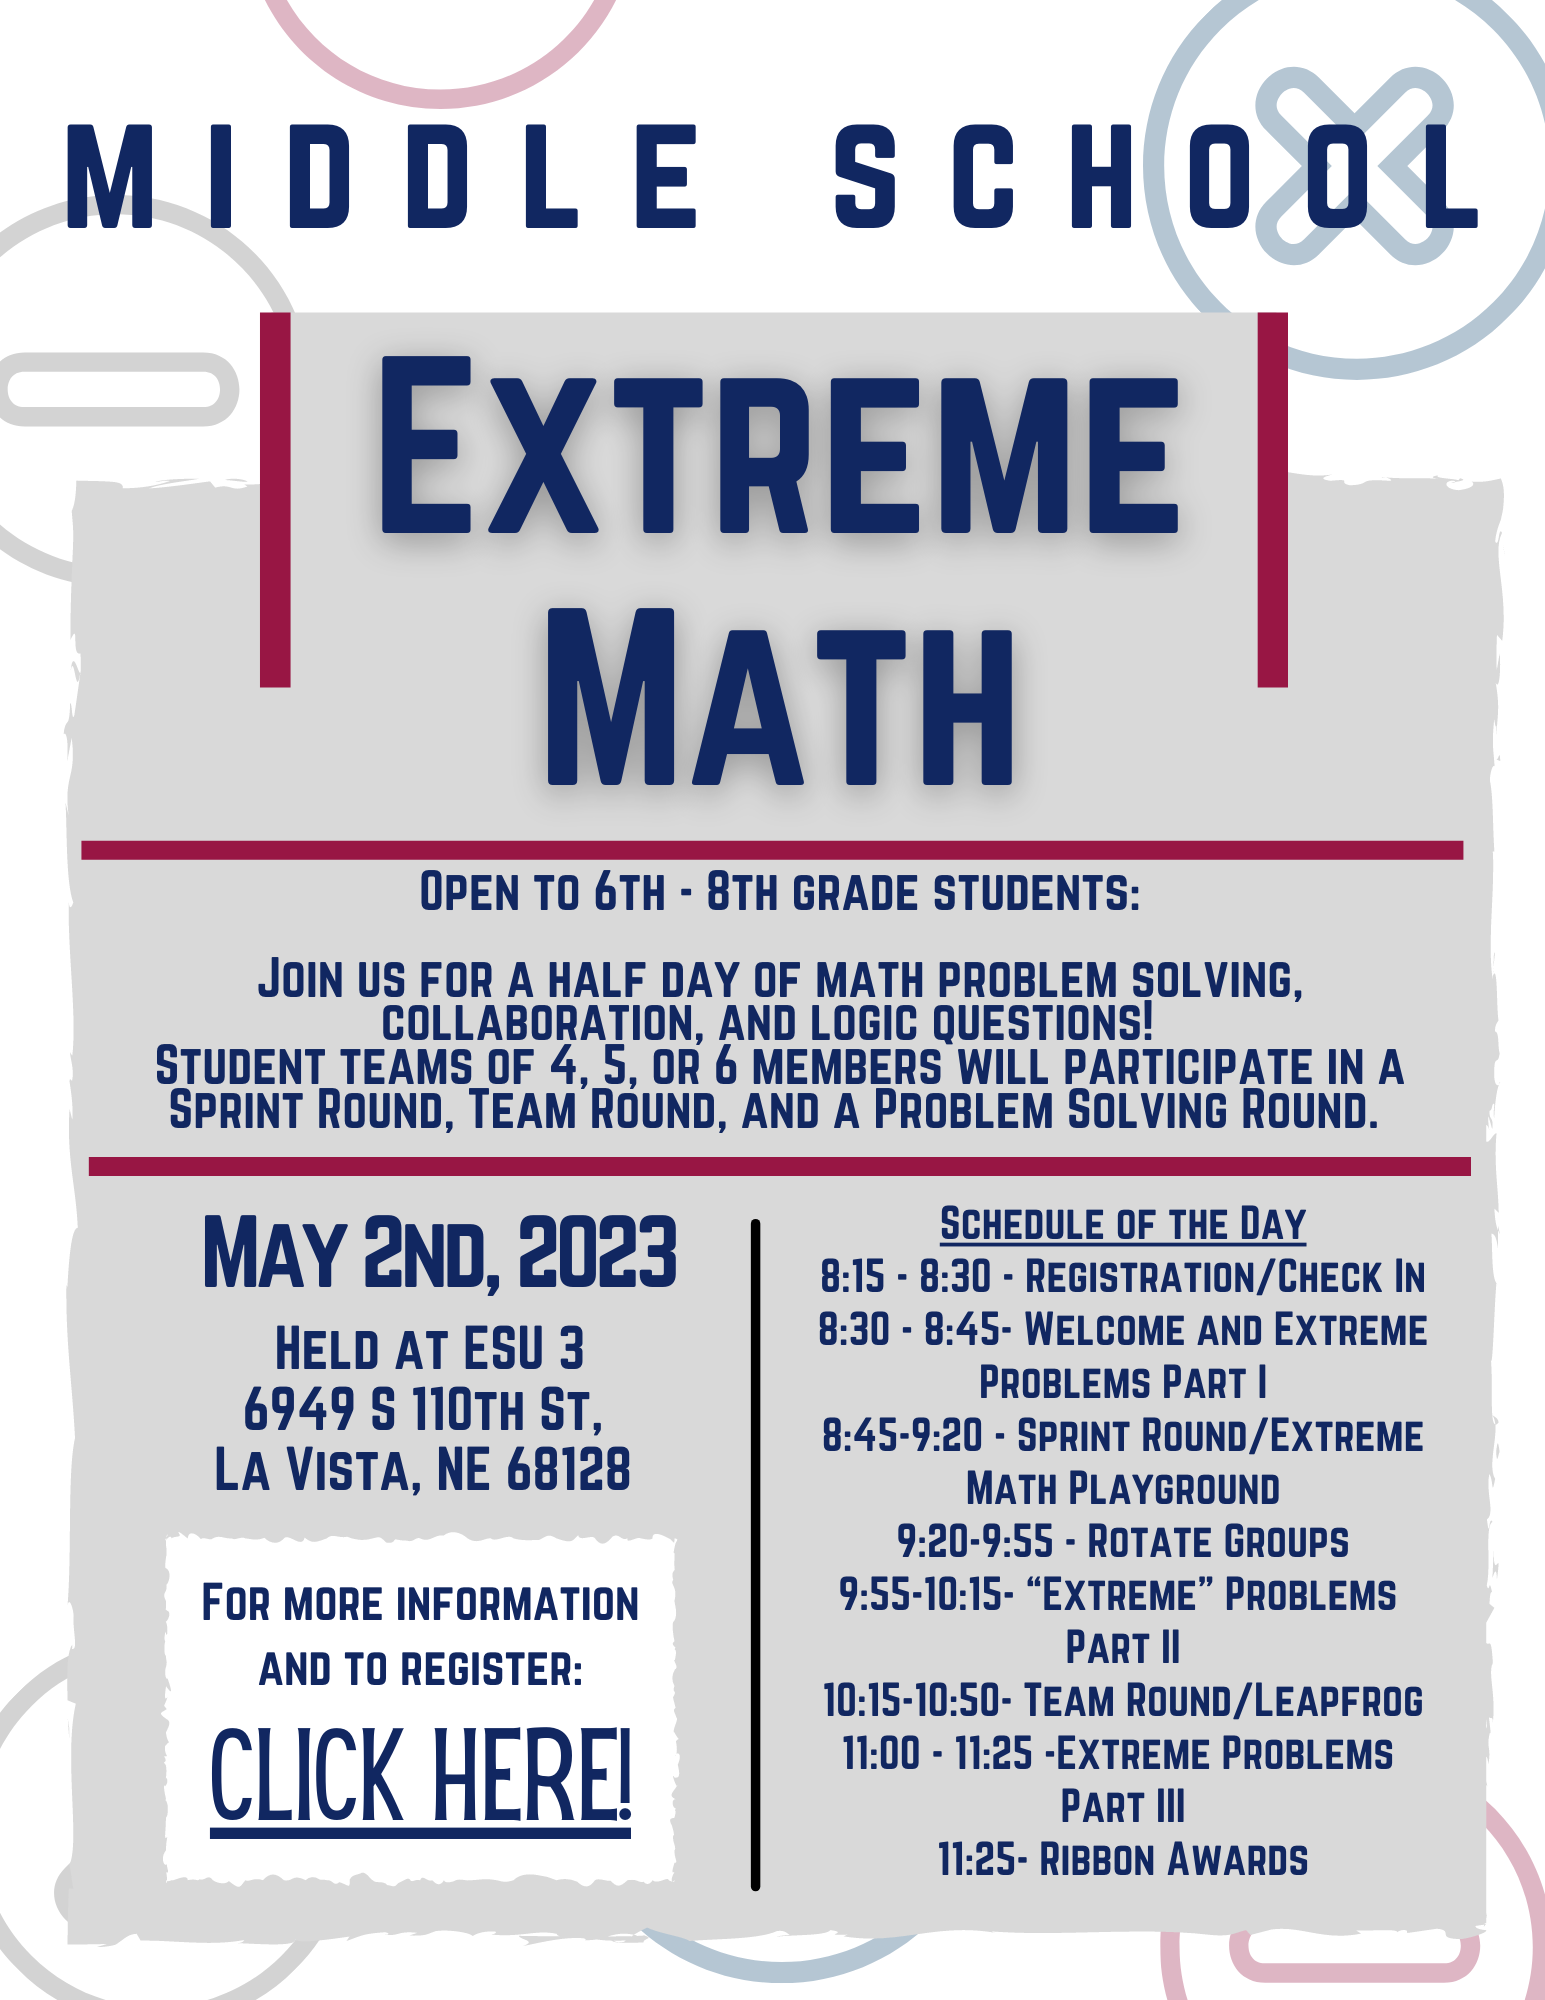 Click here to register for Middle School Extreme Math